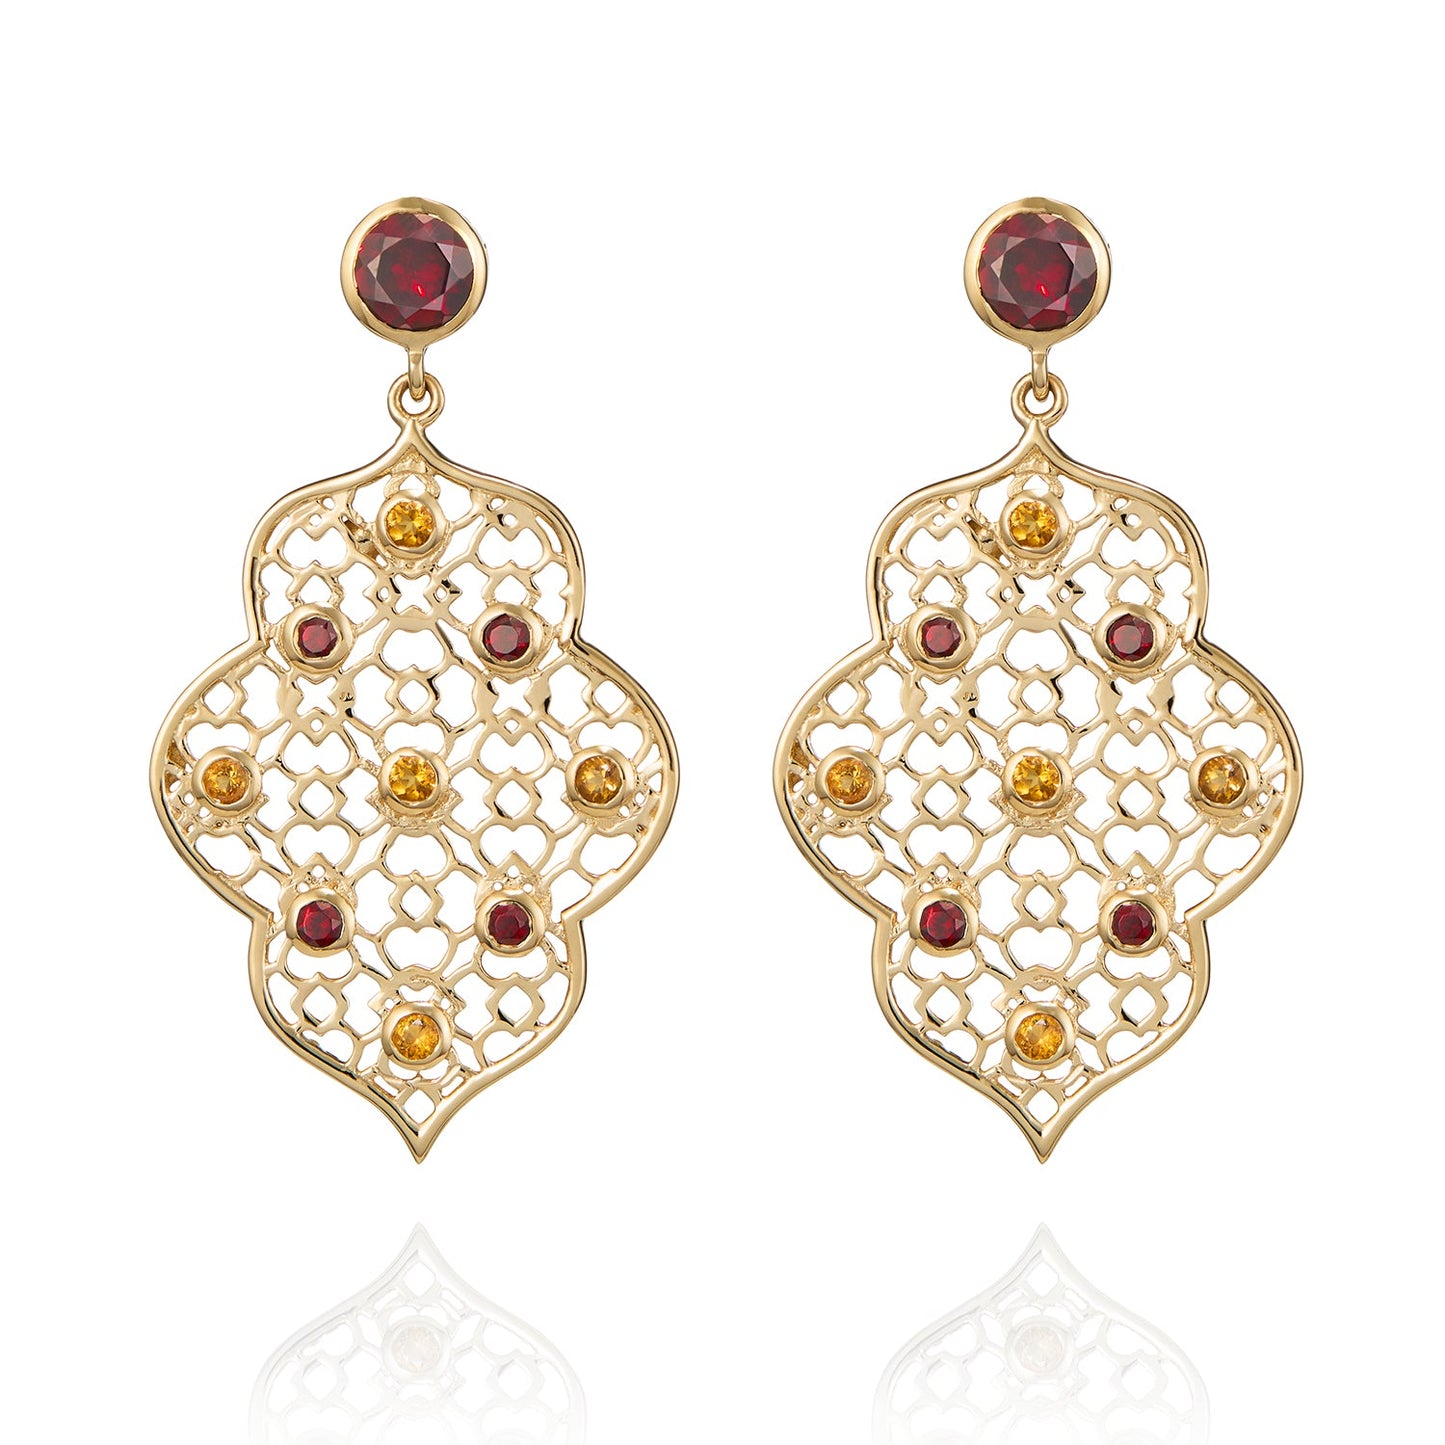 Load image into Gallery viewer, London-made luxury custom gold gemstone jewellery - Gold Filigree Earrings in Garnet and Citrine – Andalusian Collection, Augustine Jewellery, British Jewellers, Gemstone Jewellery, Luxury Jewellery London.
